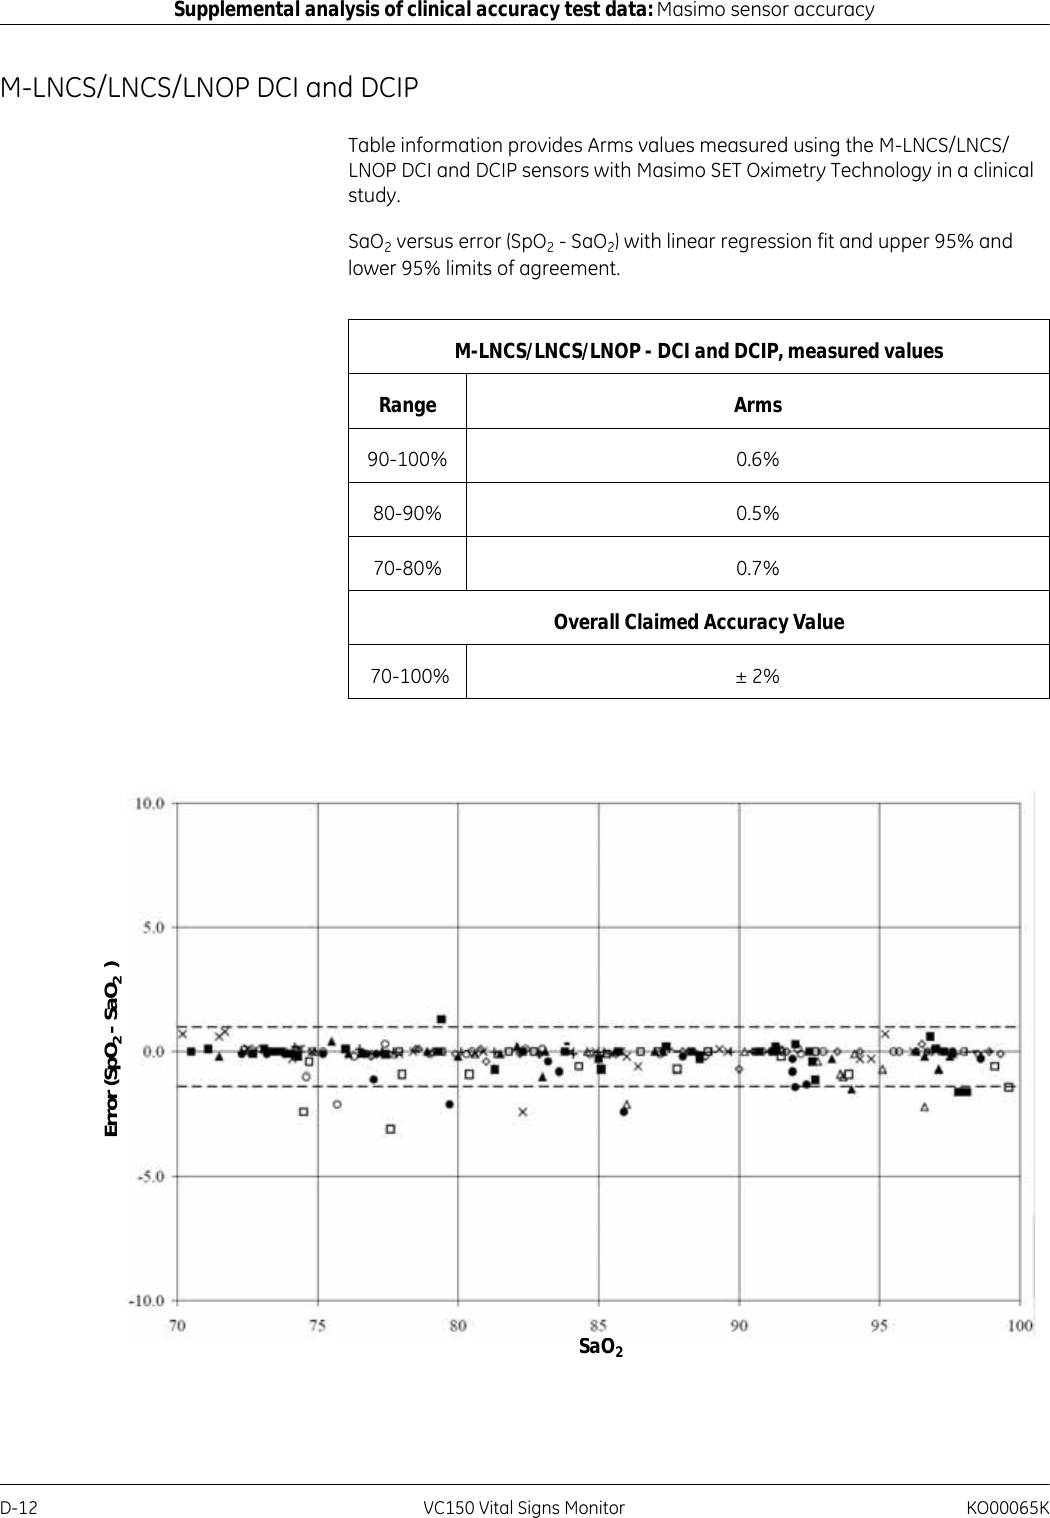 D-12 VC150 Vital Signs Monitor KO00065KSupplemental analysis of clinical accuracy test data: Masimo sensor accuracyM-LNCS/LNCS/LNOP DCI and DCIPTable information provides Arms values measured using the M-LNCS/LNCS/LNOP DCI and DCIP sensors with Masimo SET Oximetry Technology in a clinical study.SaO2 versus error (SpO2 - SaO2) with linear regression fit and upper 95% and lower 95% limits of agreement.M-LNCS/LNCS/LNOP - DCI and DCIP, measured valuesRange Arms90-100% 0.6%80-90% 0.5%70-80% 0.7%Overall Claimed Accuracy Value 70-100% ± 2%SaO2Error (SpO2 - SaO2  )